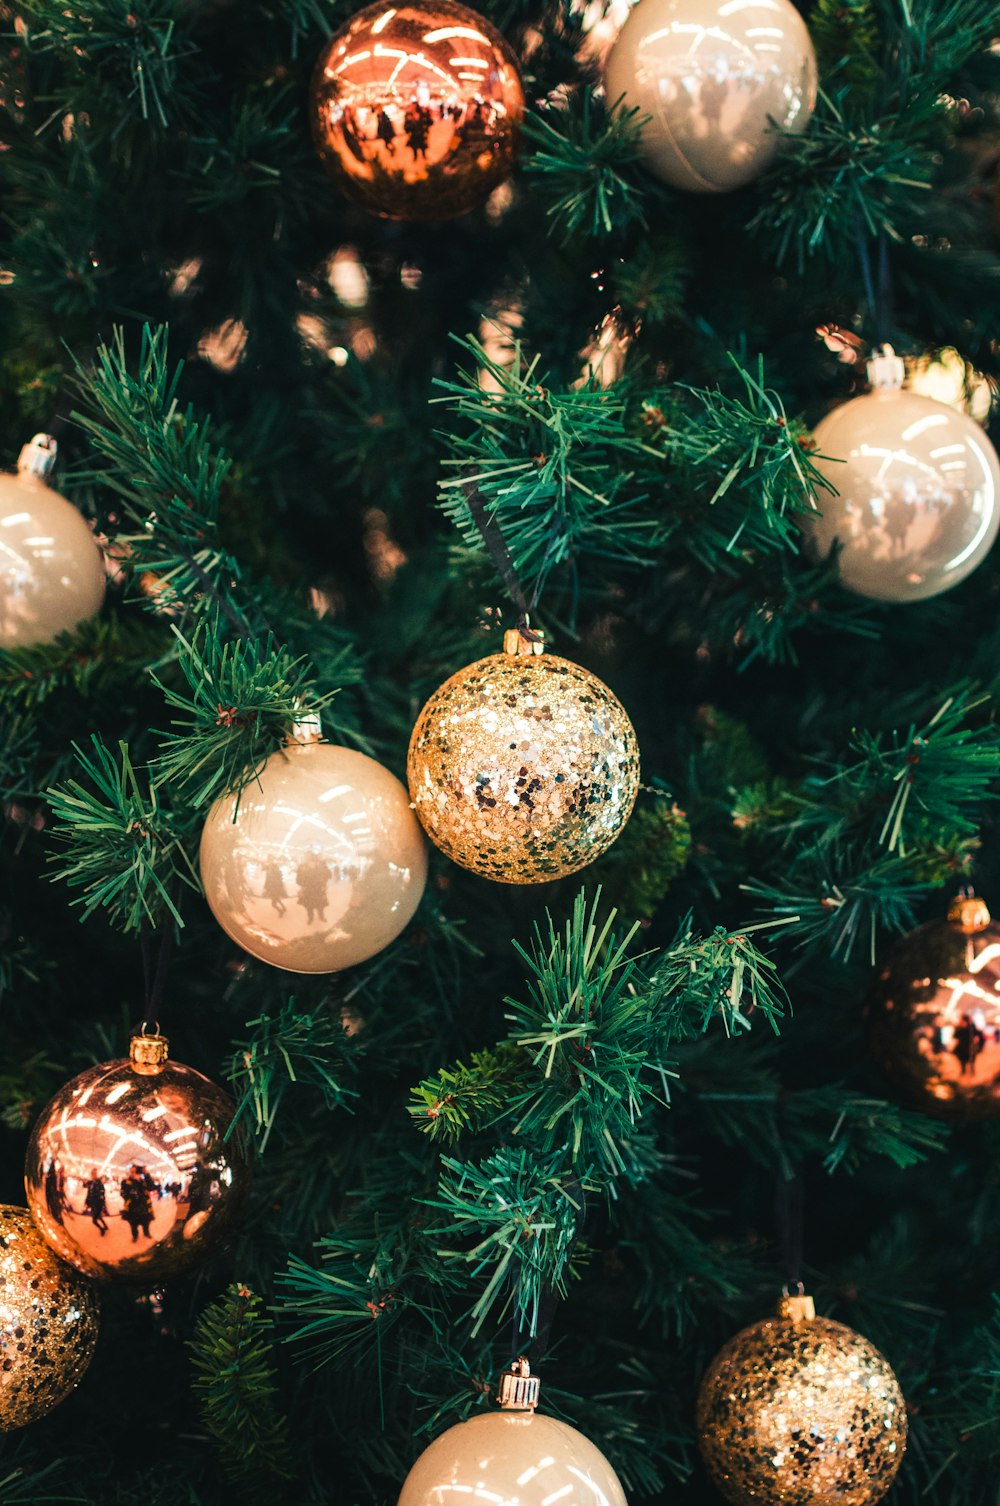 Christmas Tree Decorations Pictures | Download Free Images on Unsplash